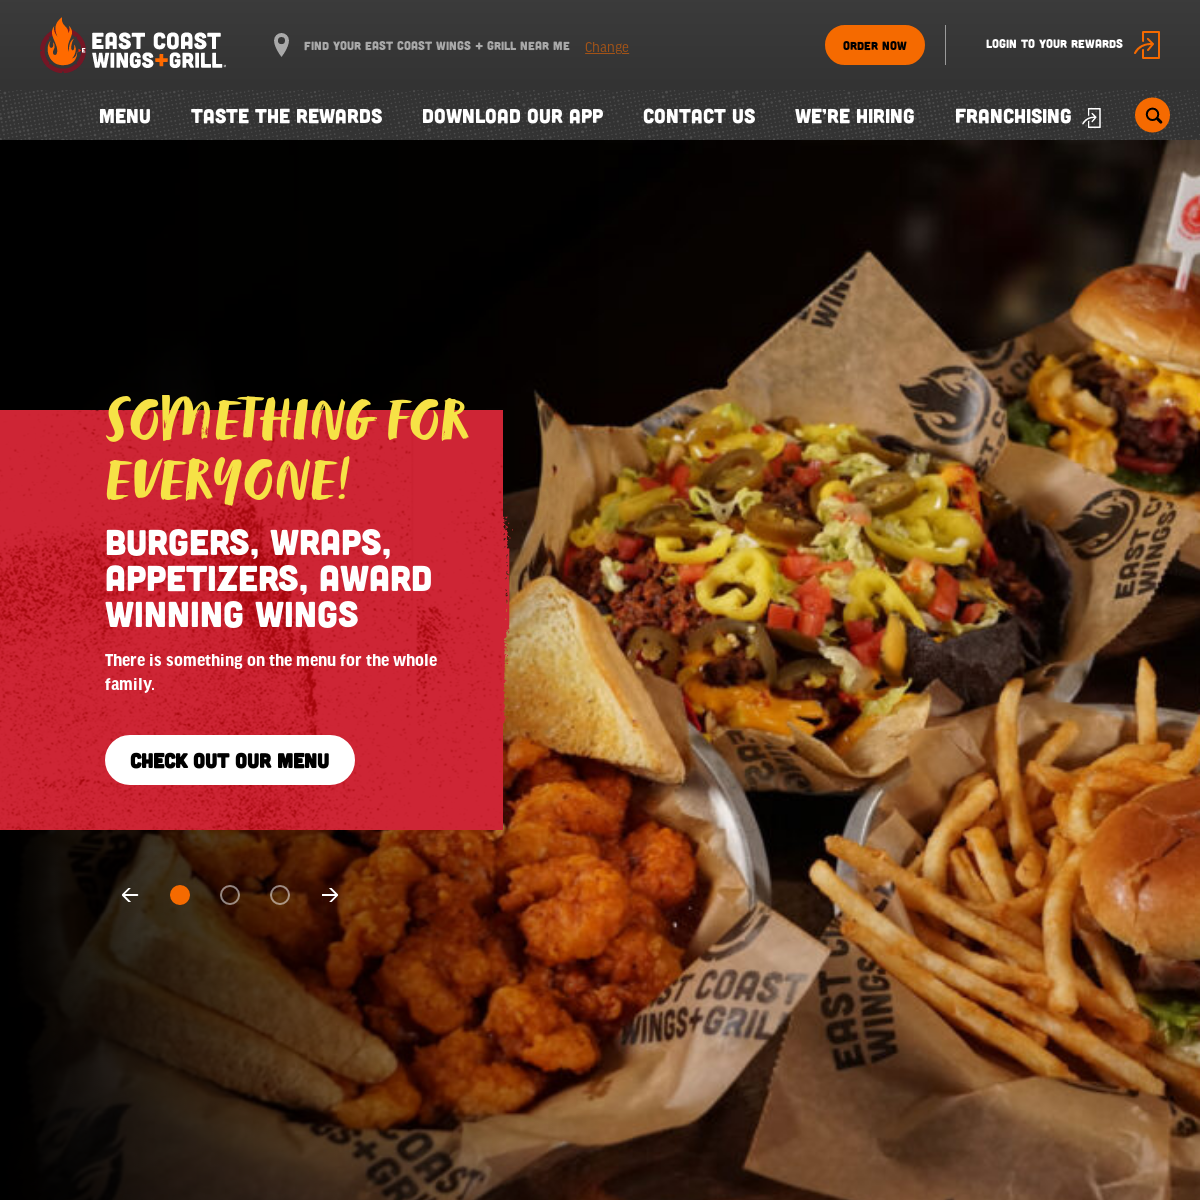 A complete backup of eastcoastwings.com